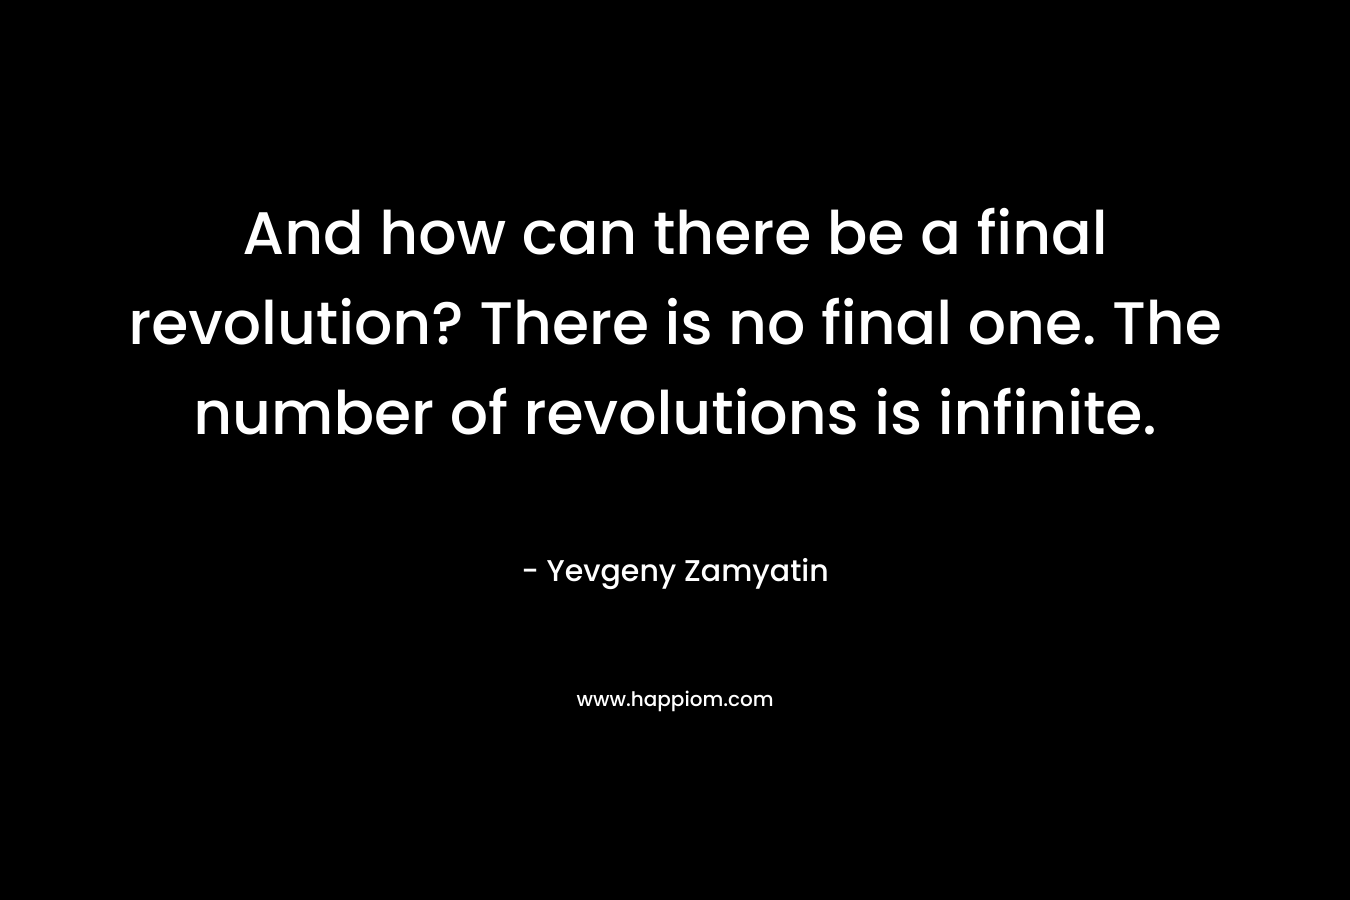 And how can there be a final revolution? There is no final one. The number of revolutions is infinite.